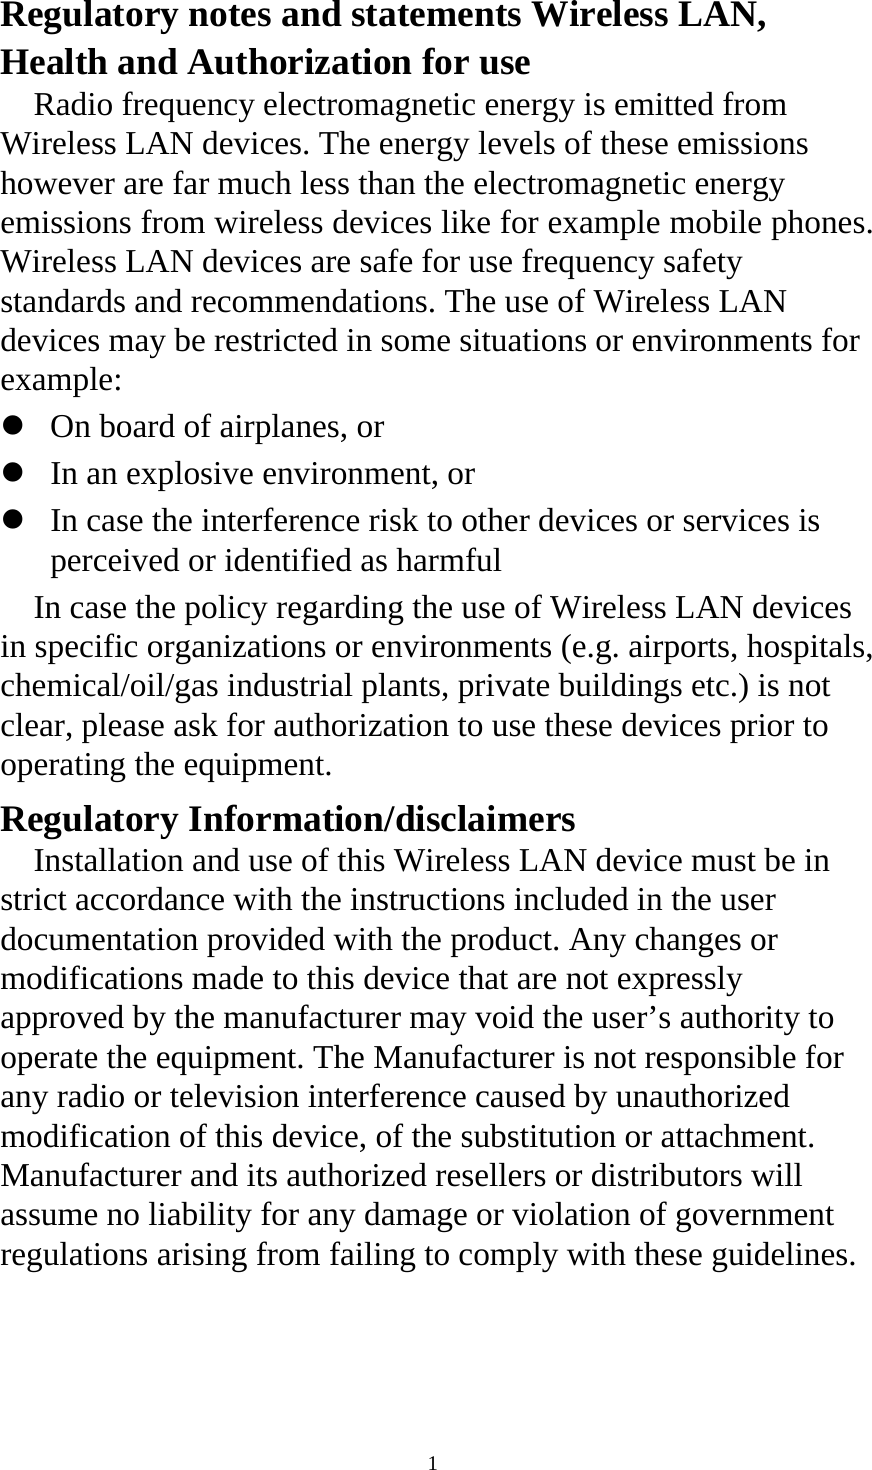  1 Regulatory notes and statements Wireless LAN, Health and Authorization for use   Radio frequency electromagnetic energy is emitted from Wireless LAN devices. The energy levels of these emissions however are far much less than the electromagnetic energy emissions from wireless devices like for example mobile phones. Wireless LAN devices are safe for use frequency safety standards and recommendations. The use of Wireless LAN devices may be restricted in some situations or environments for example:  z On board of airplanes, or   z In an explosive environment, or   z In case the interference risk to other devices or services is perceived or identified as harmful   In case the policy regarding the use of Wireless LAN devices in specific organizations or environments (e.g. airports, hospitals, chemical/oil/gas industrial plants, private buildings etc.) is not clear, please ask for authorization to use these devices prior to operating the equipment.   Regulatory Information/disclaimers   Installation and use of this Wireless LAN device must be in strict accordance with the instructions included in the user documentation provided with the product. Any changes or modifications made to this device that are not expressly approved by the manufacturer may void the user’s authority to operate the equipment. The Manufacturer is not responsible for any radio or television interference caused by unauthorized modification of this device, of the substitution or attachment. Manufacturer and its authorized resellers or distributors will assume no liability for any damage or violation of government regulations arising from failing to comply with these guidelines.   